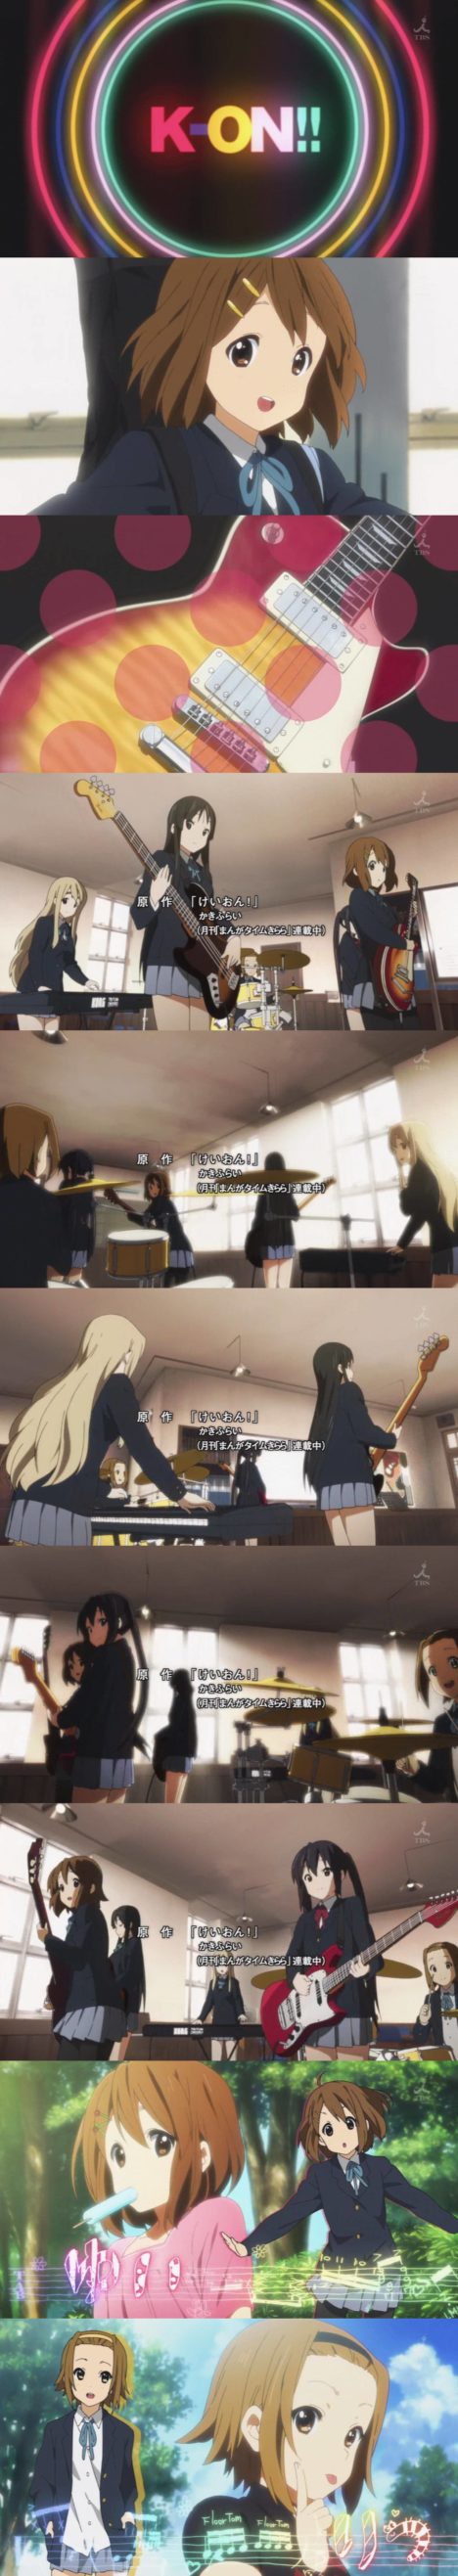 k-on_episode_one_10